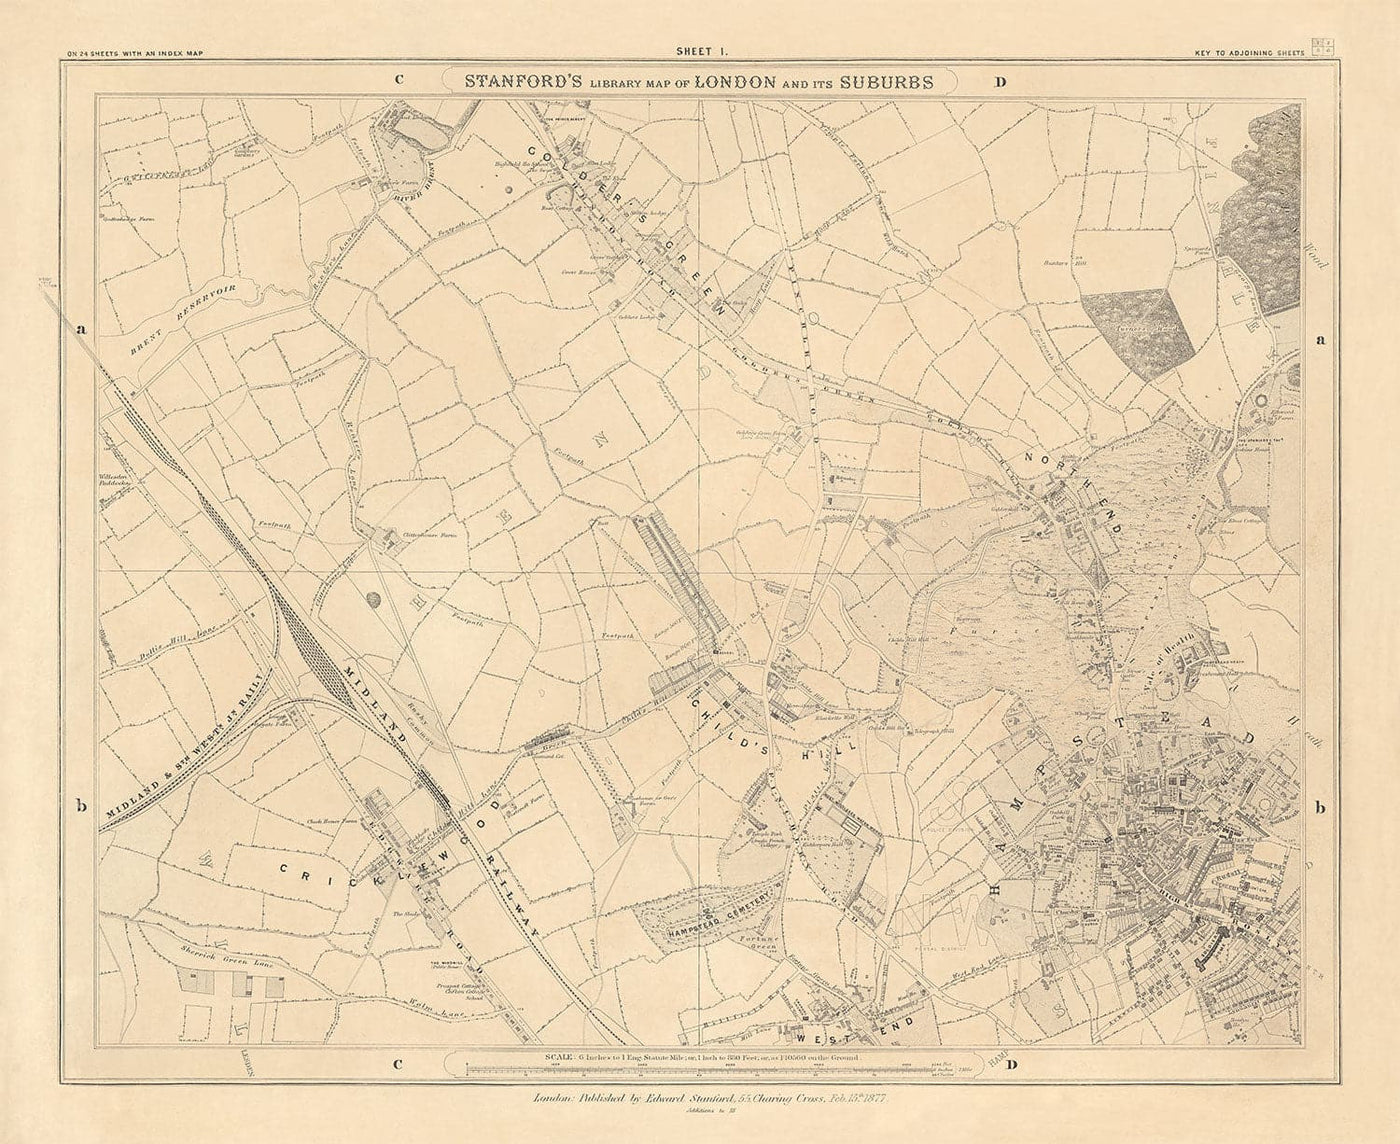 Old Map of North London 1862 by Edward Stanford - Hampstead, Cricklewood, Golders Green, Brent - NW2, NW3, NW11, NW4